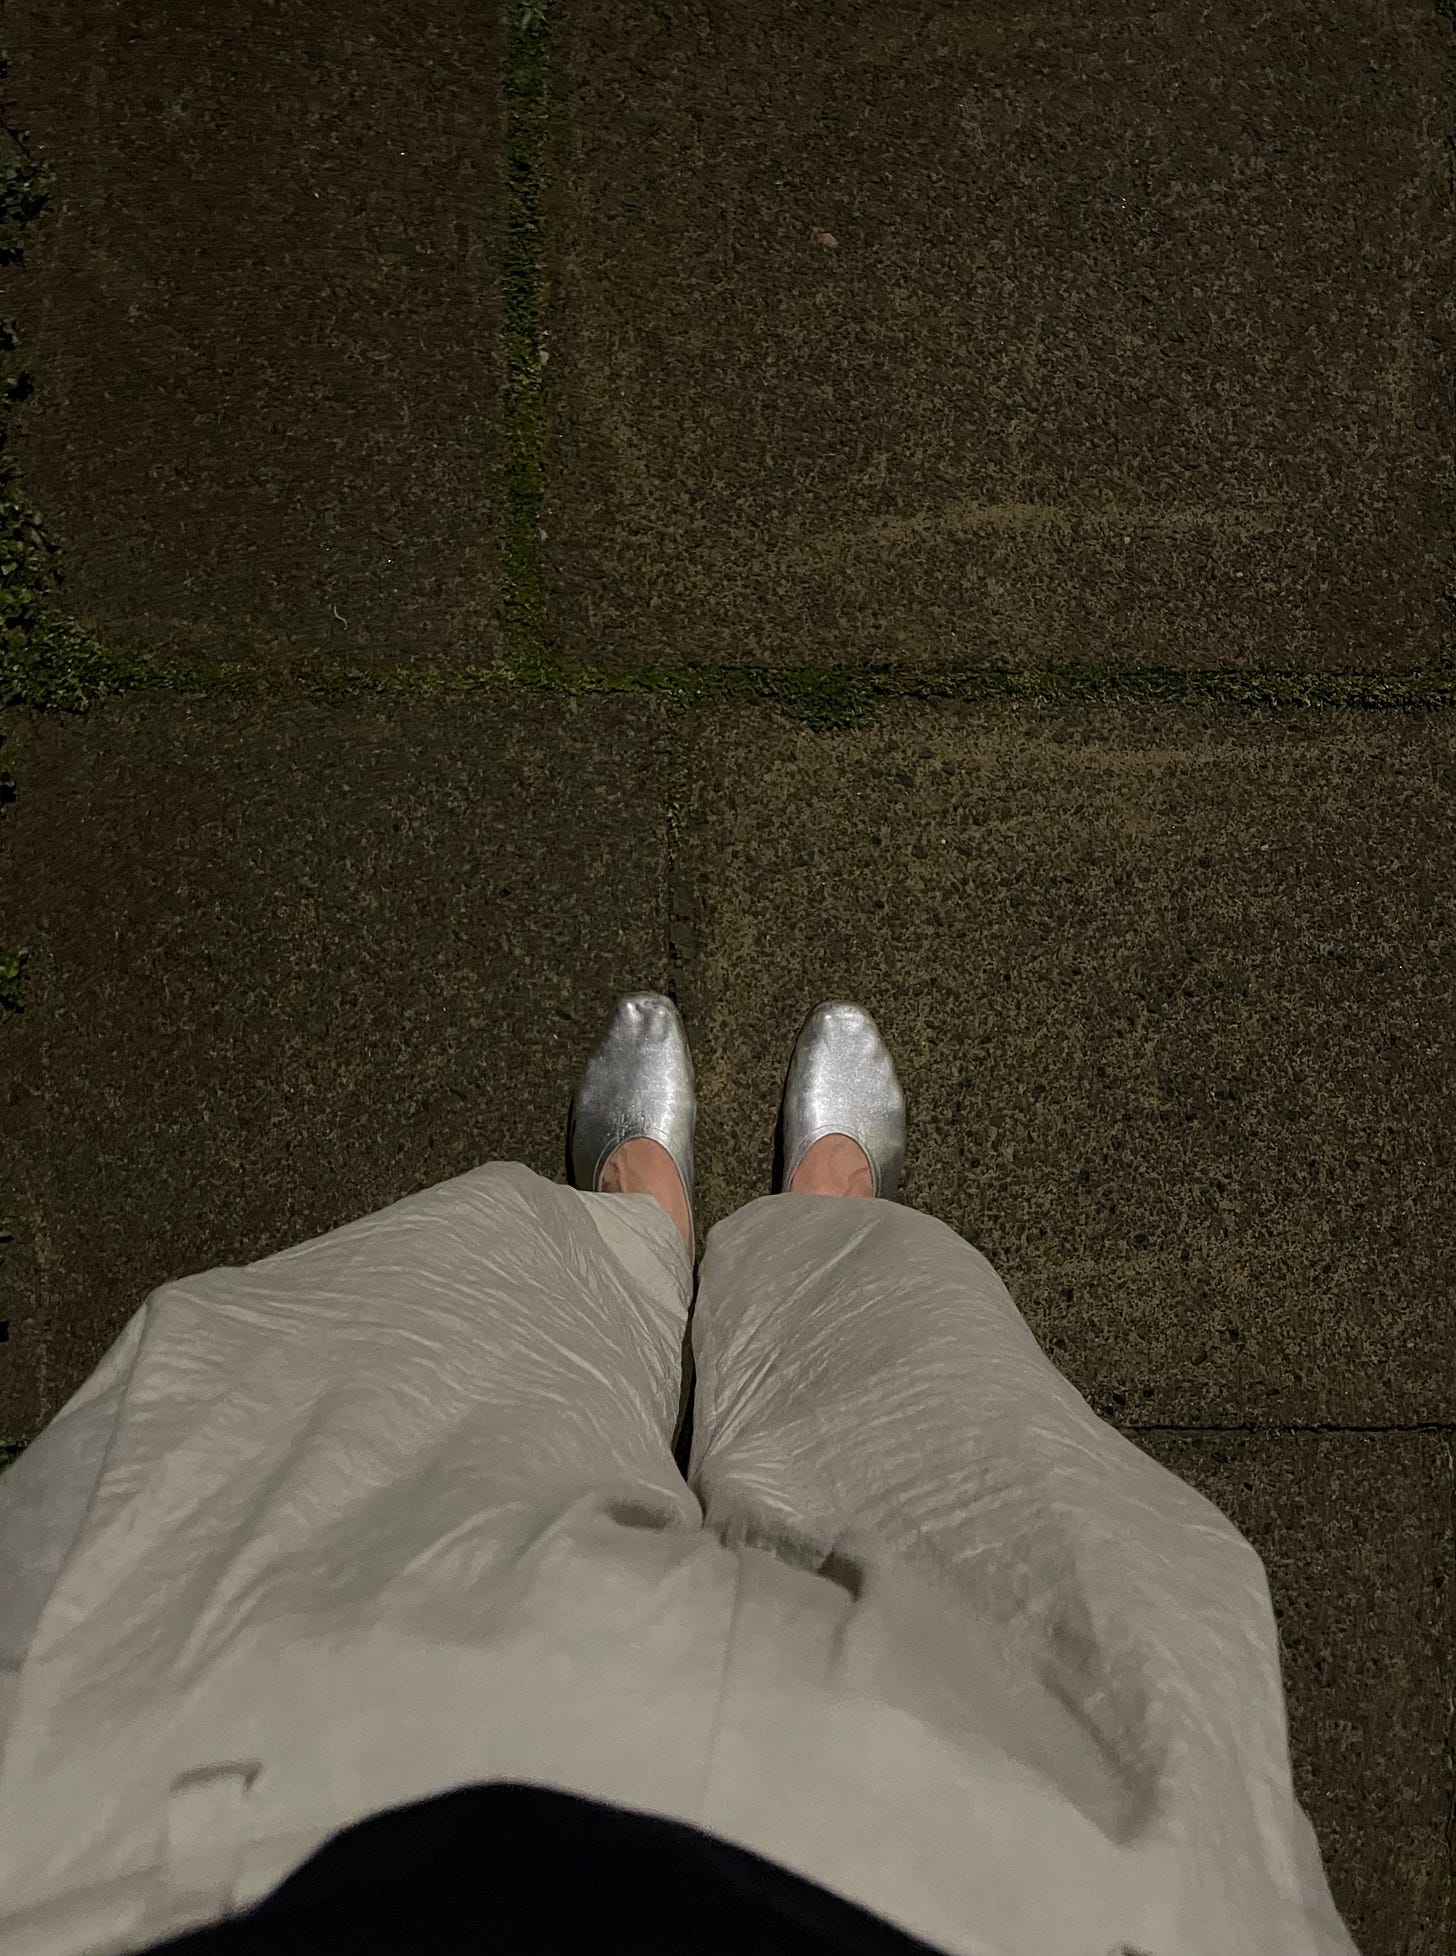 Overview of woman’s silver shoes facing down